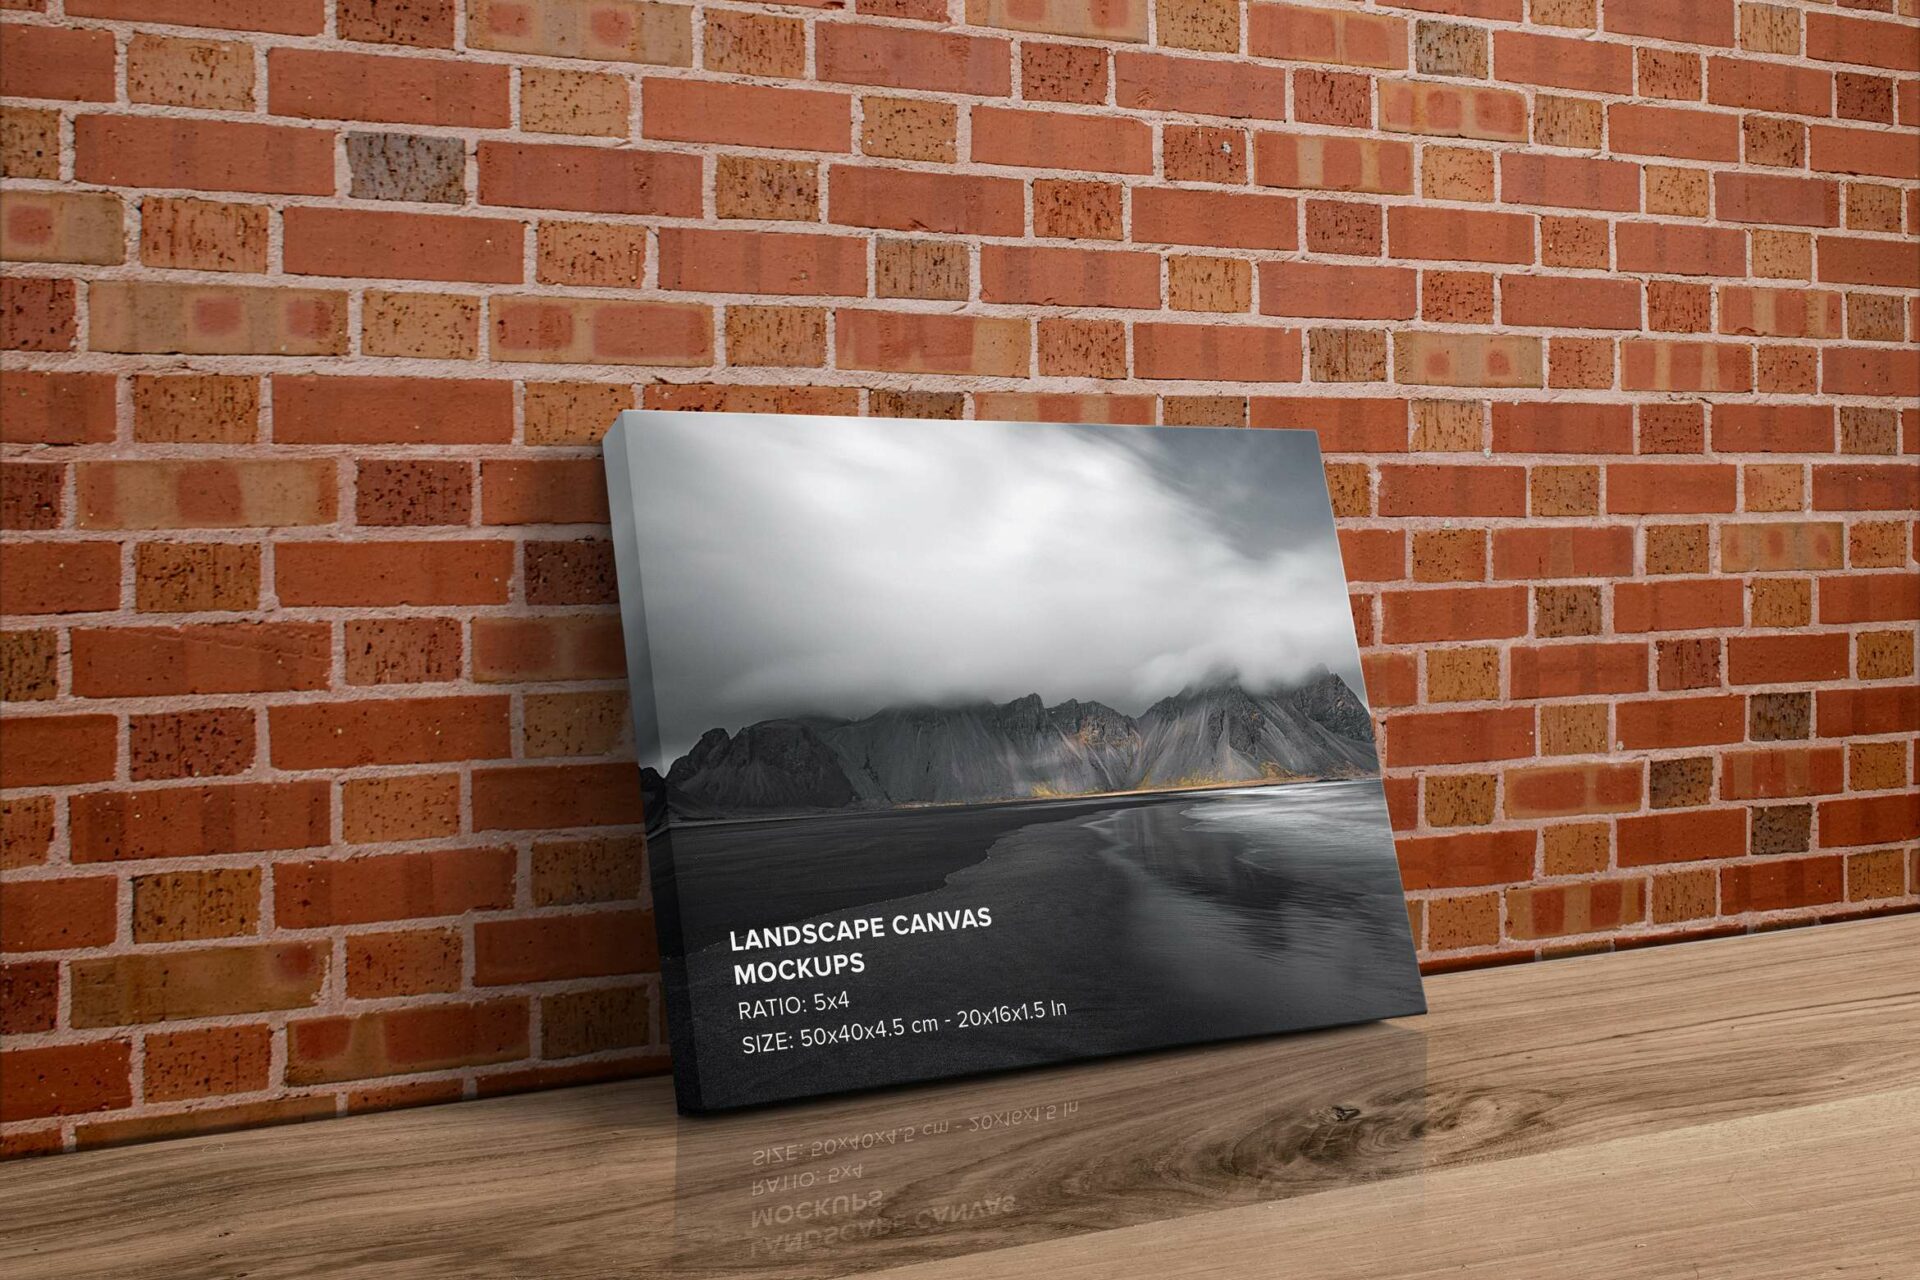 Leaning on wall art canvas ratio 5x4 Mockup - Left 1.5 In Wrap